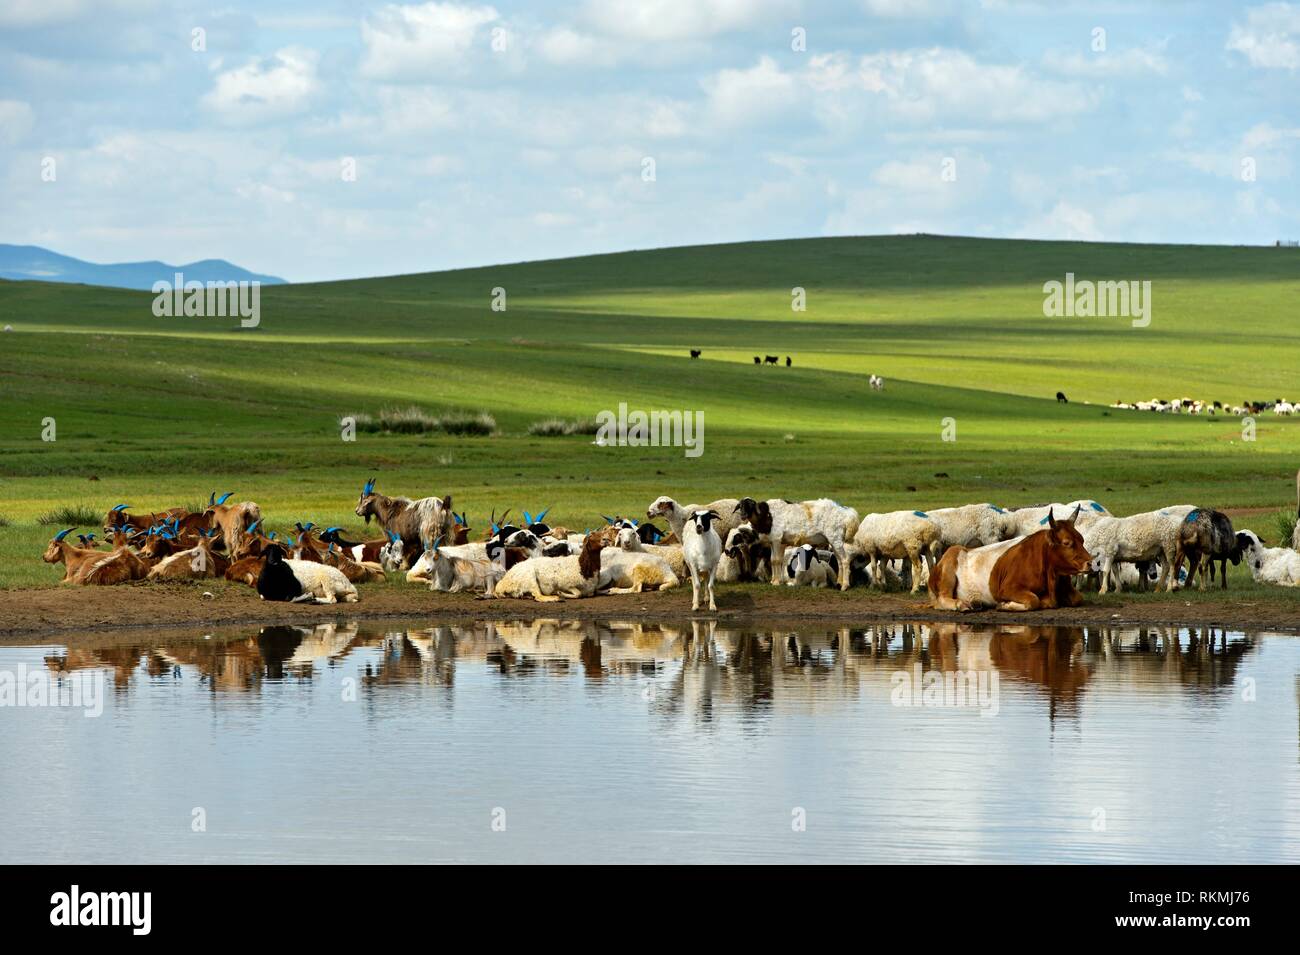 Cattle and sheep at a water hole in the Mongolian steppe near Ulaanshiveet, Bulgan Province, Mongolia. Stock Photo